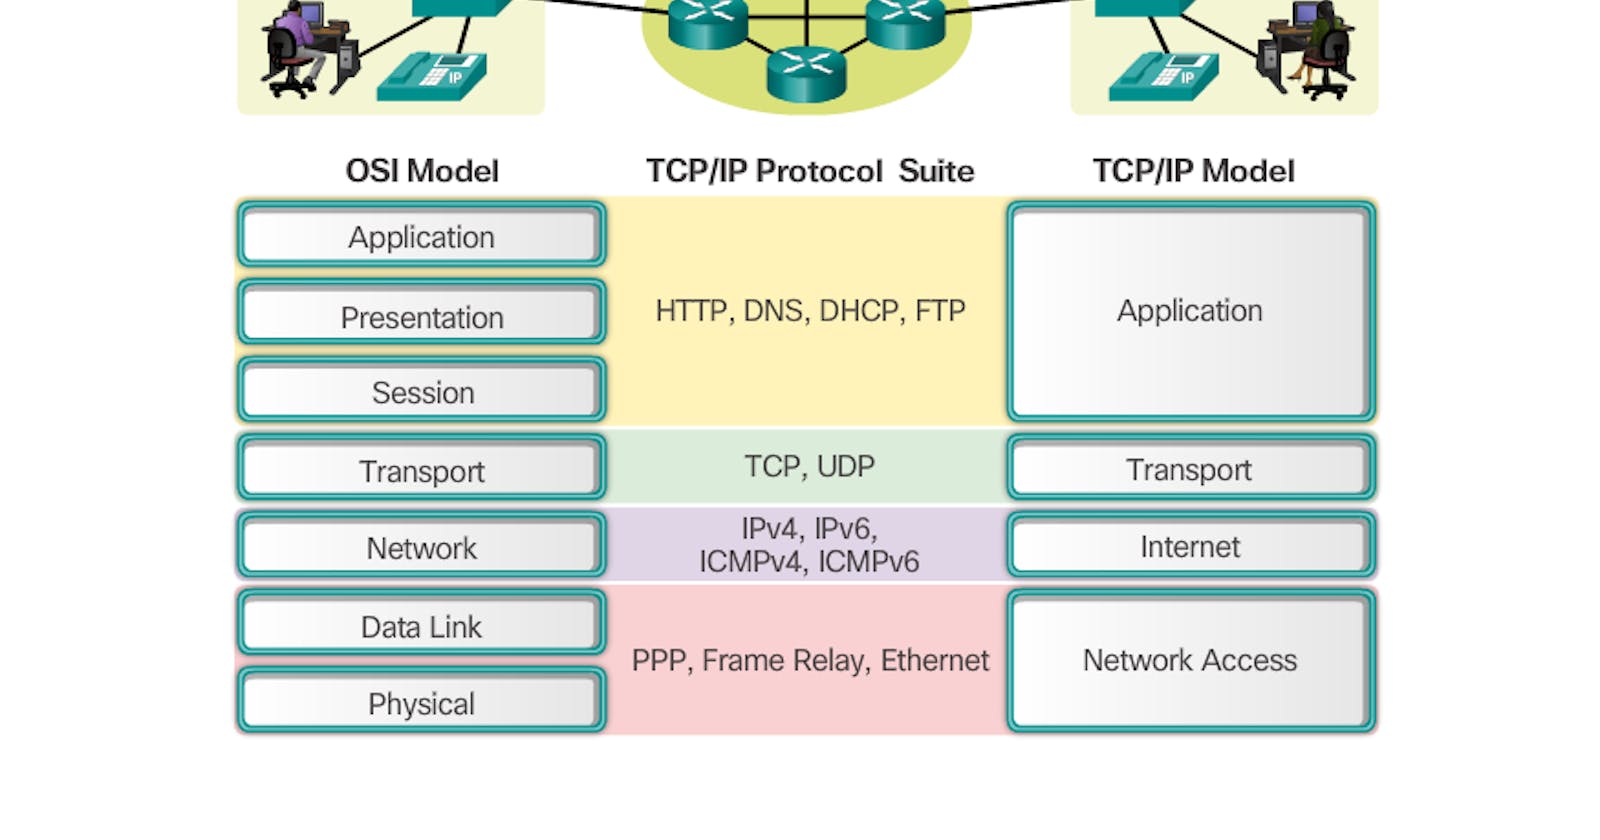 Networking Protocols in simple form.